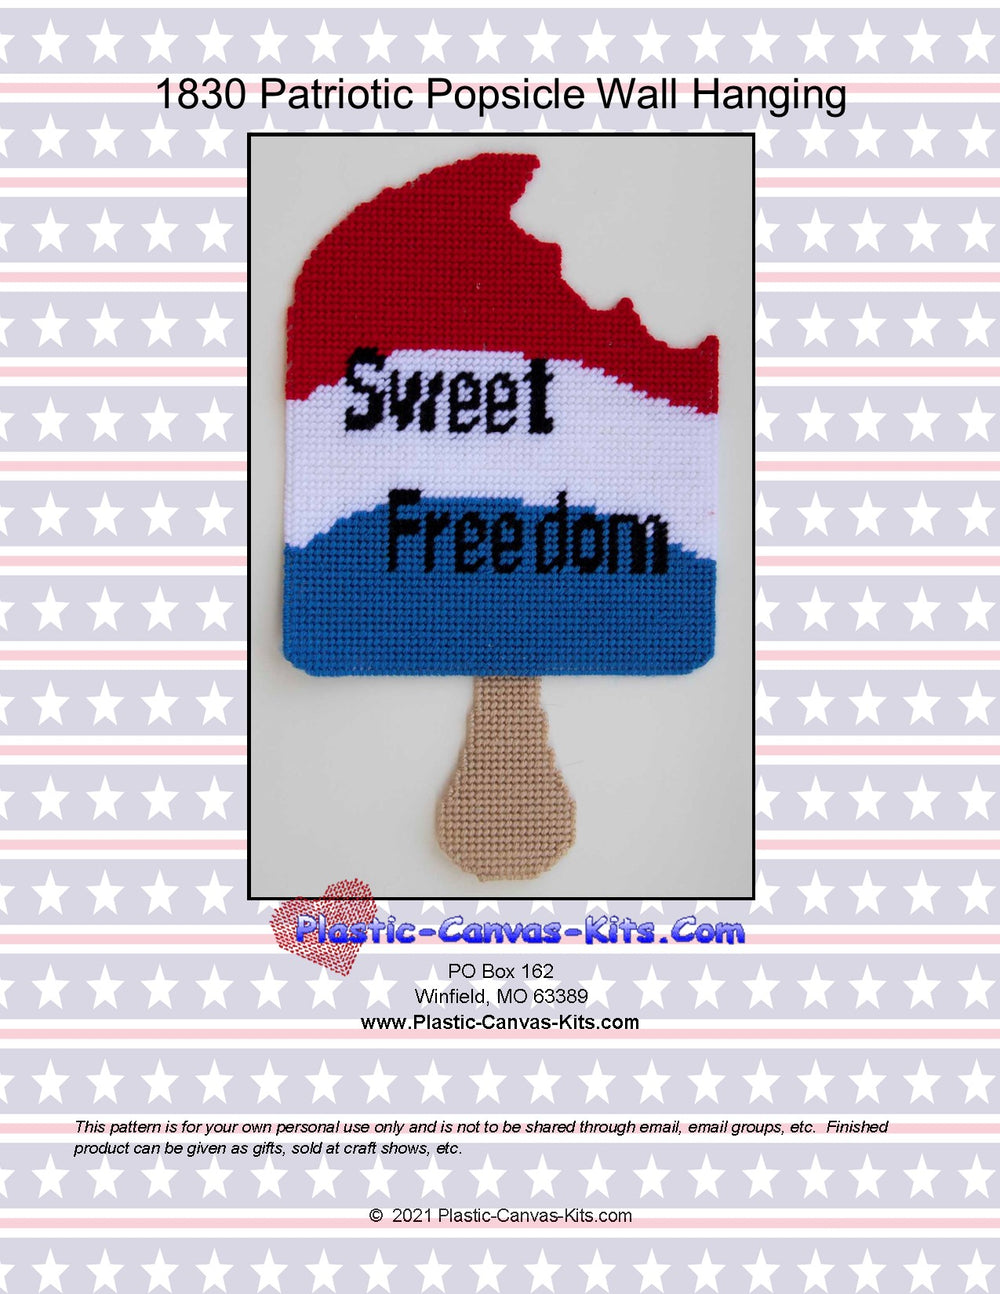 Sweet Freedom Popsicle Wall Hanging